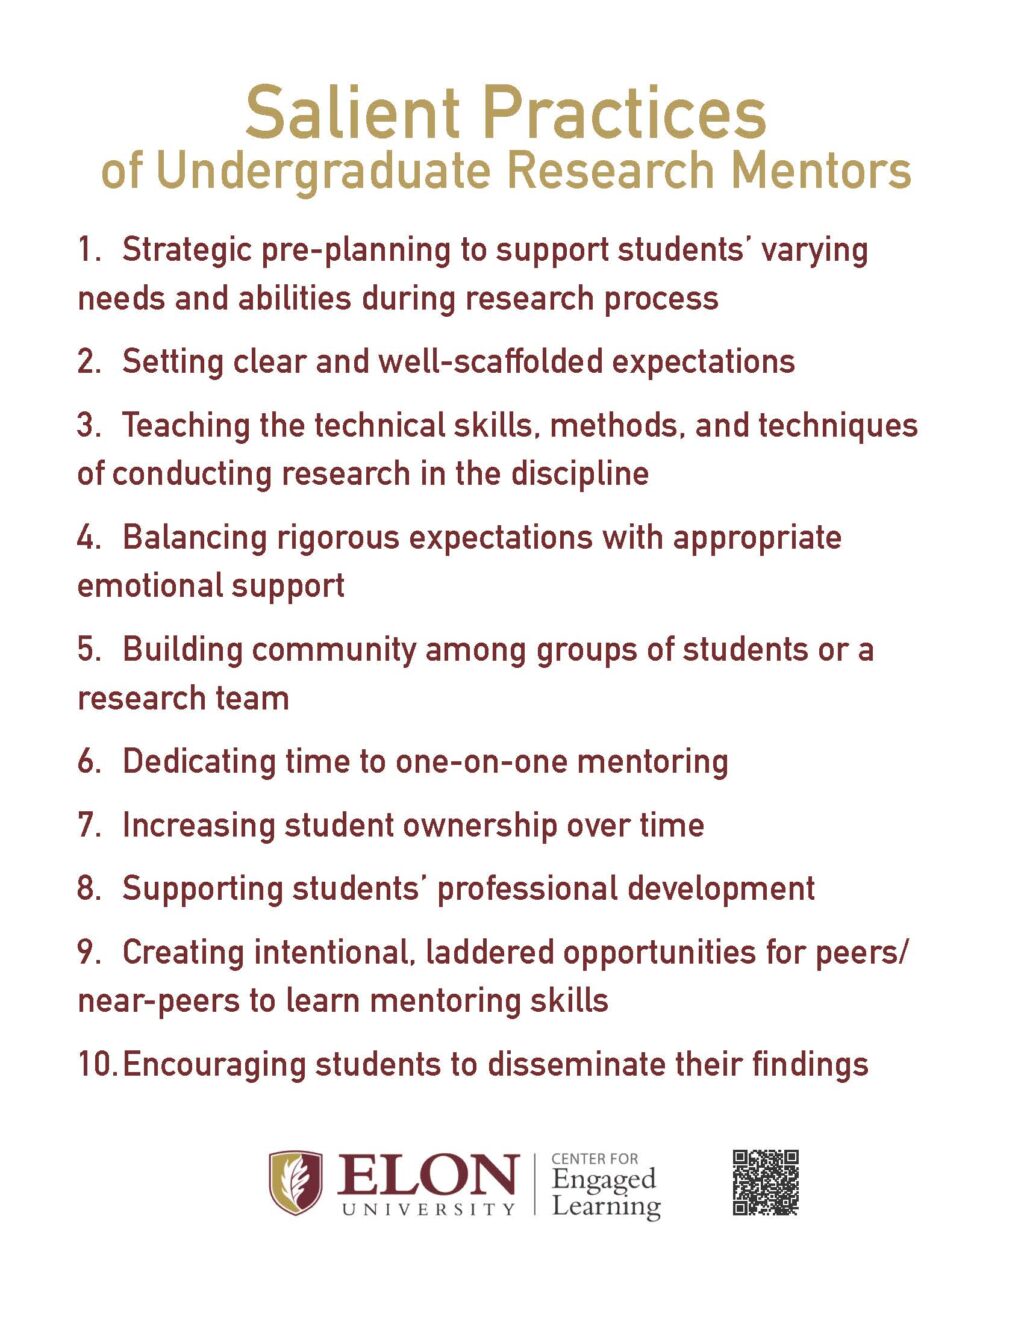 Image version of a printable list of the ten salient practices of undergraduate research mentors.